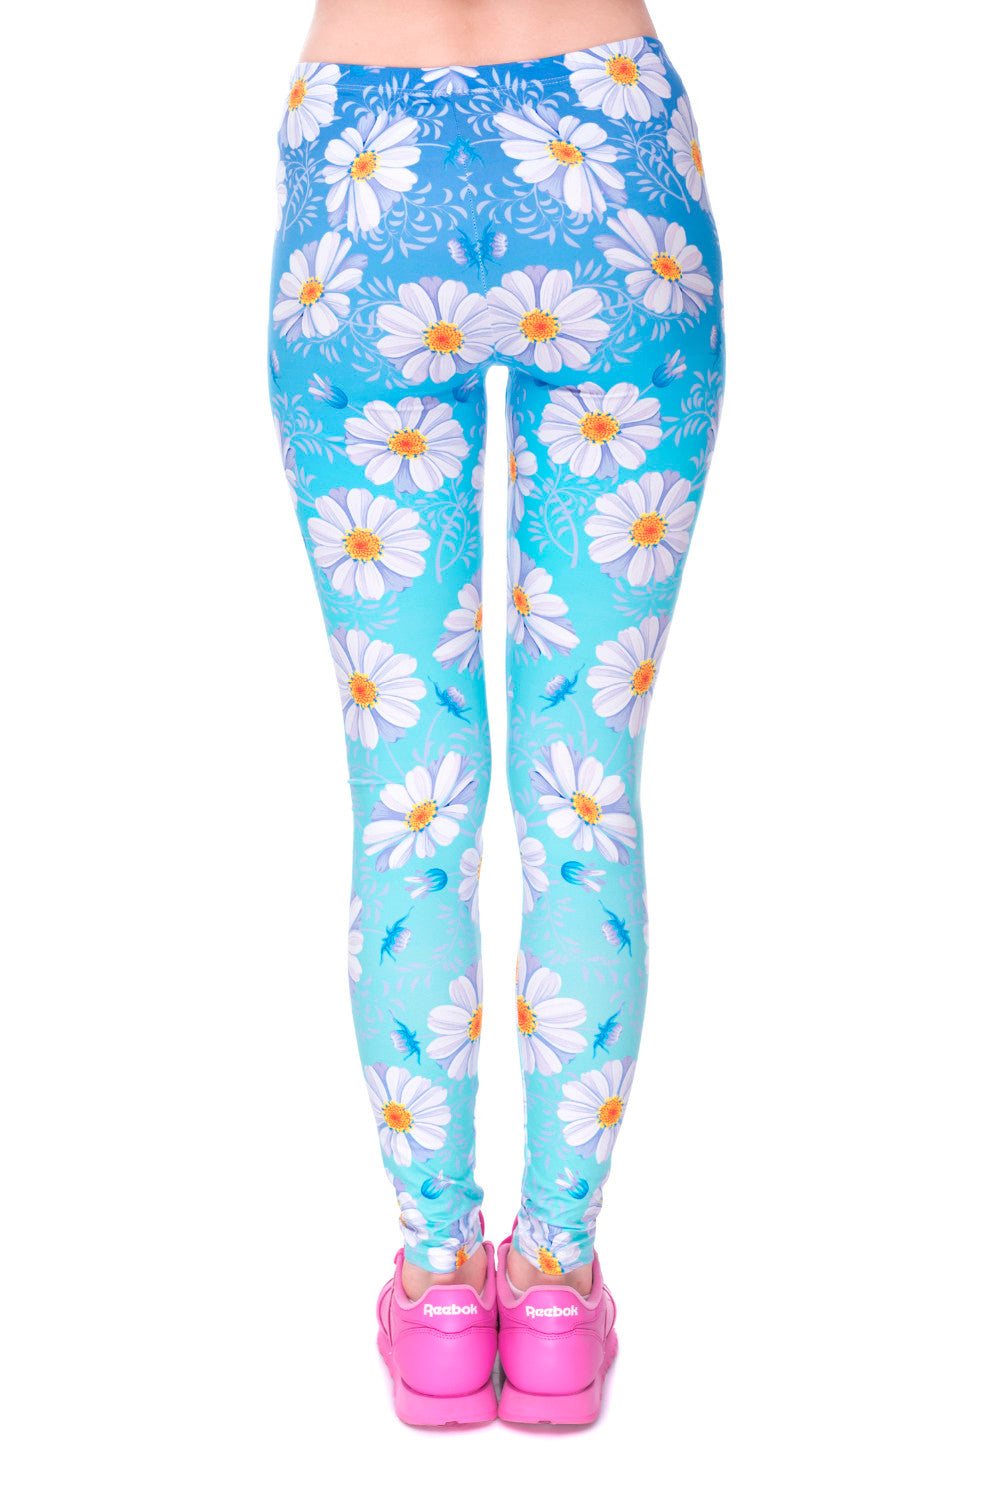 Elasticity Daisy Blue Ombre Printed Fashion Slim fit Legging Trousers Casual Polyester Pants